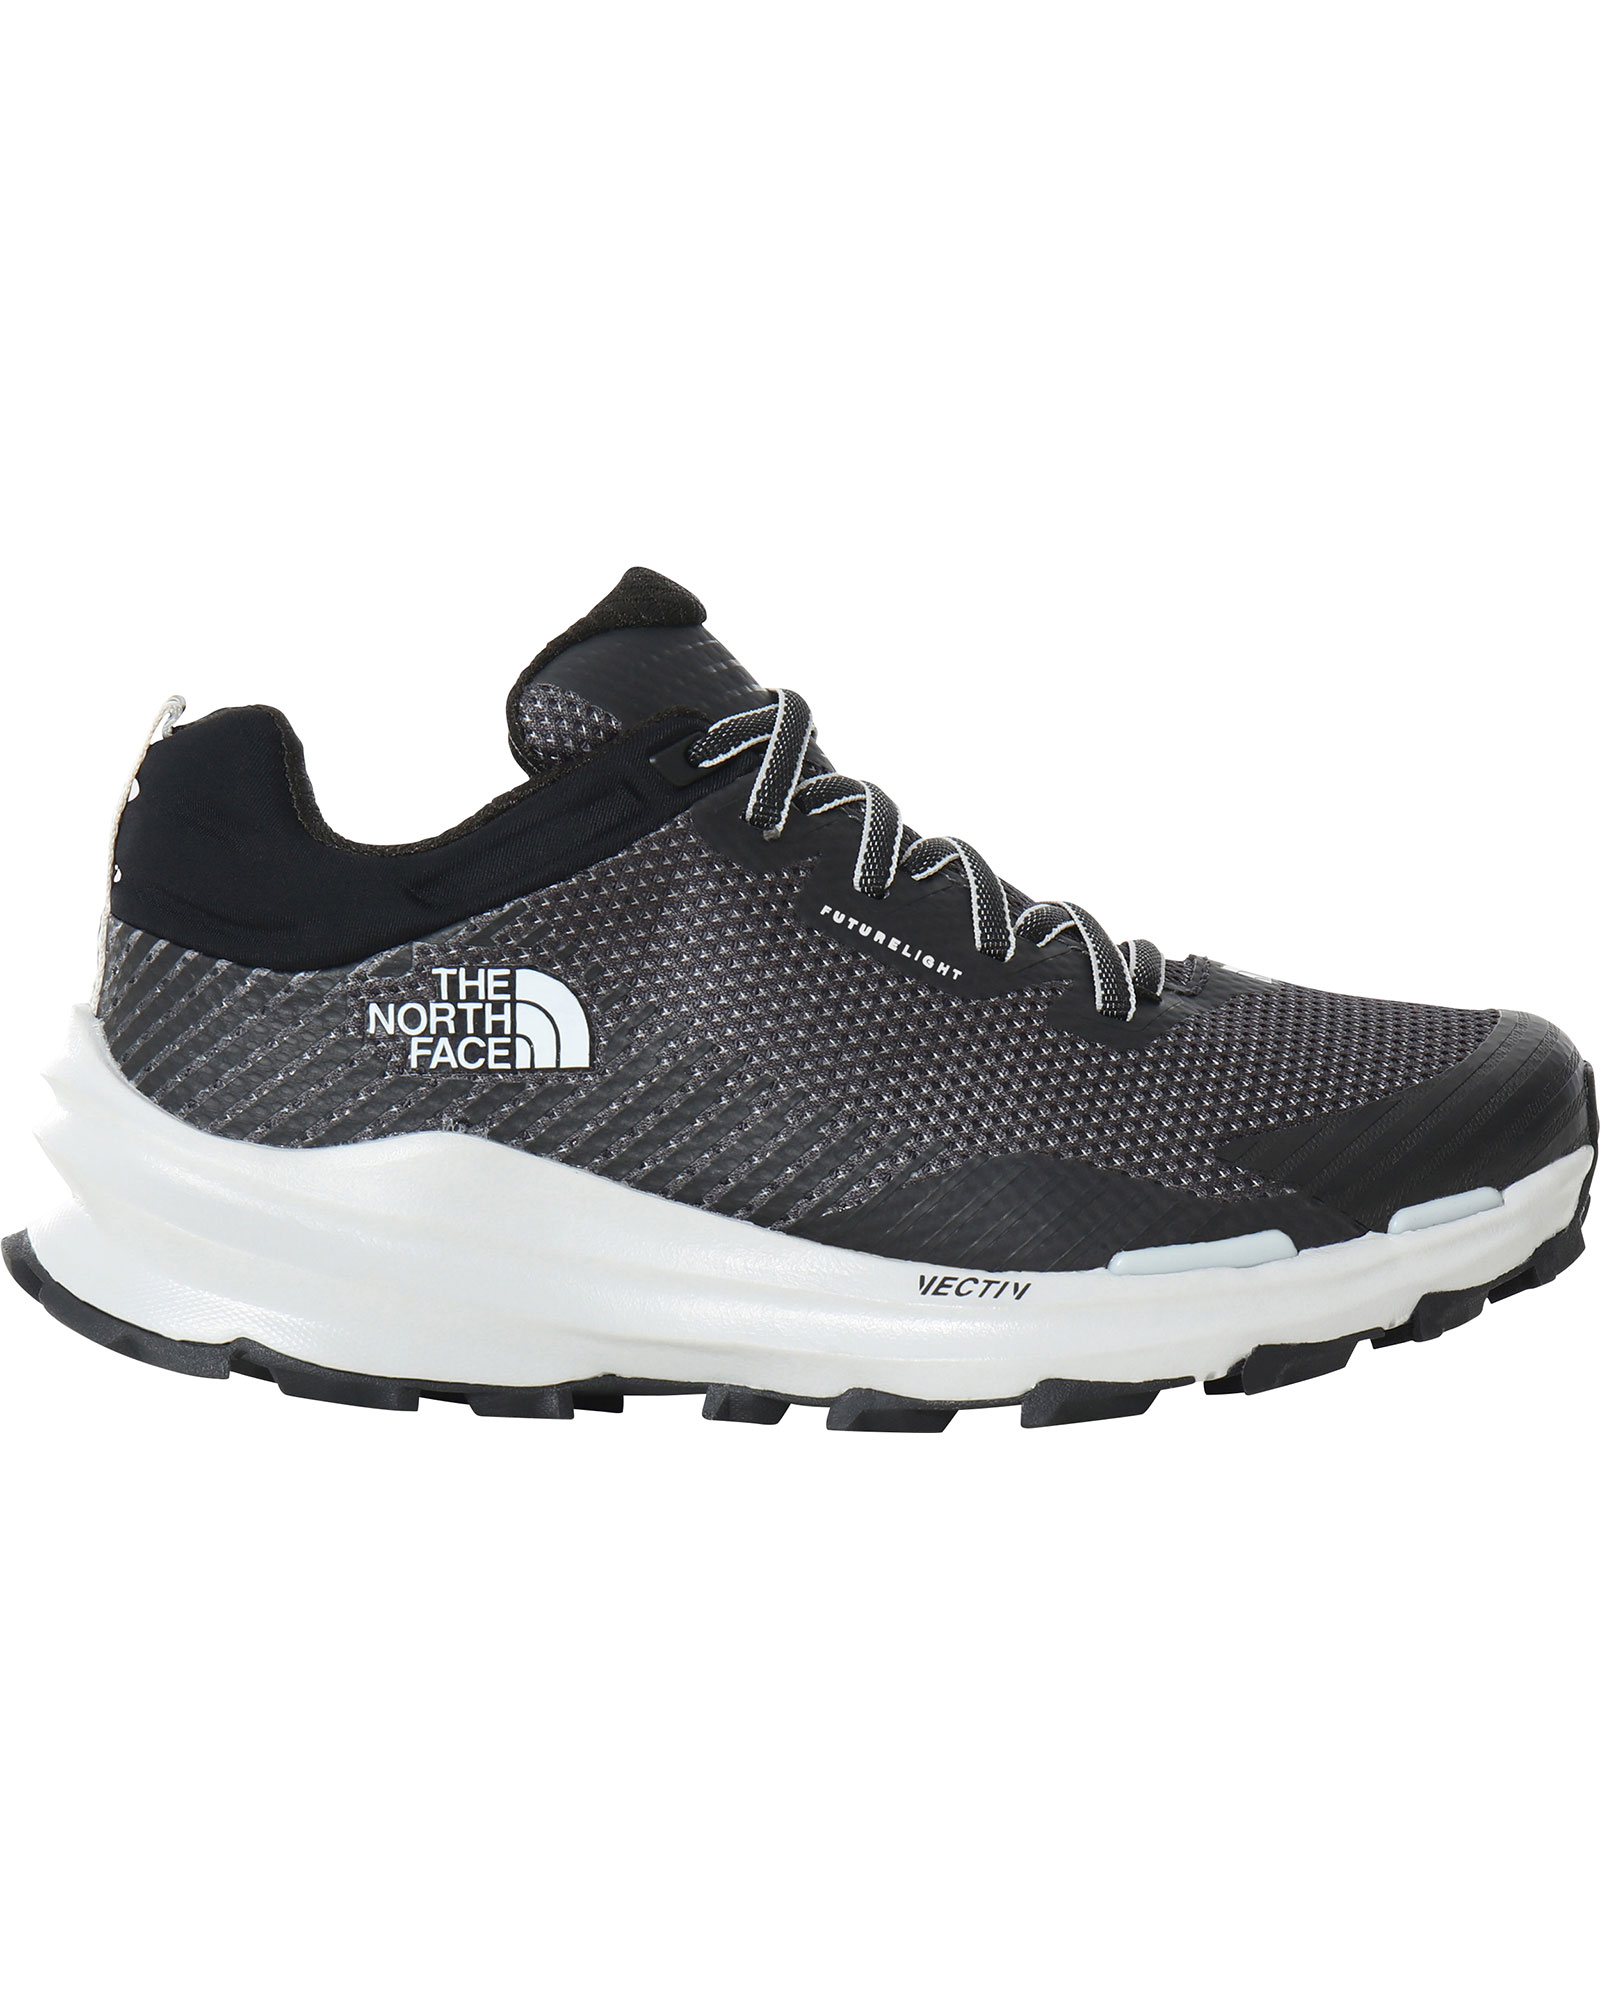 The North Face Vectiv Fastpack Futurelight Womens Shoes